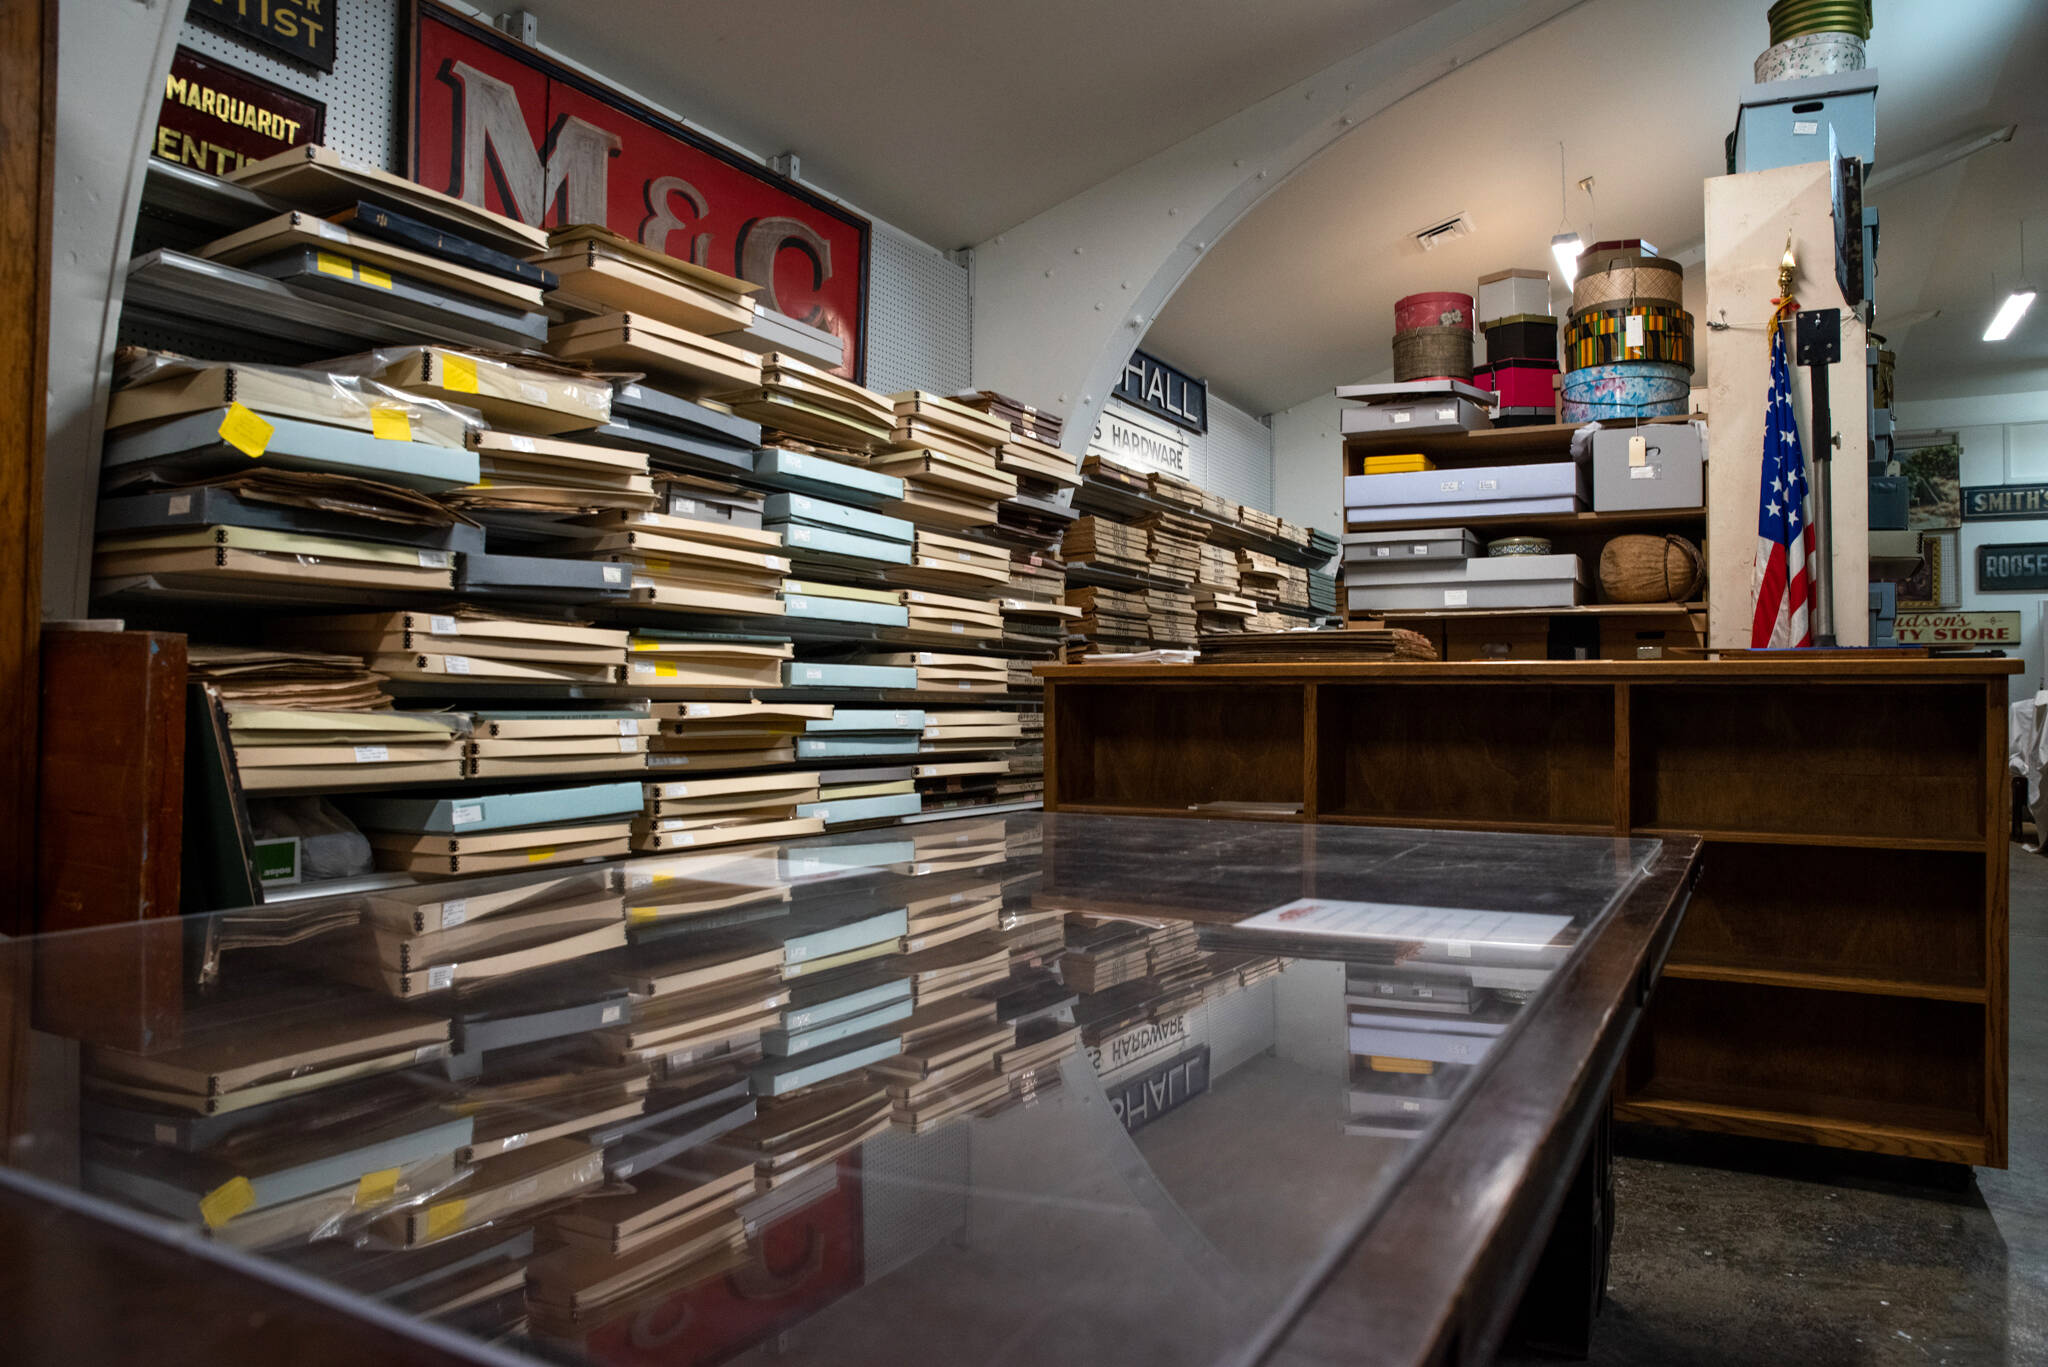 Massive stacks of newspapers are stored in the archives of the North Olympic History Center in Port Angeles, where they expect to scan them so more people can have access to the info from the World Wide Web.